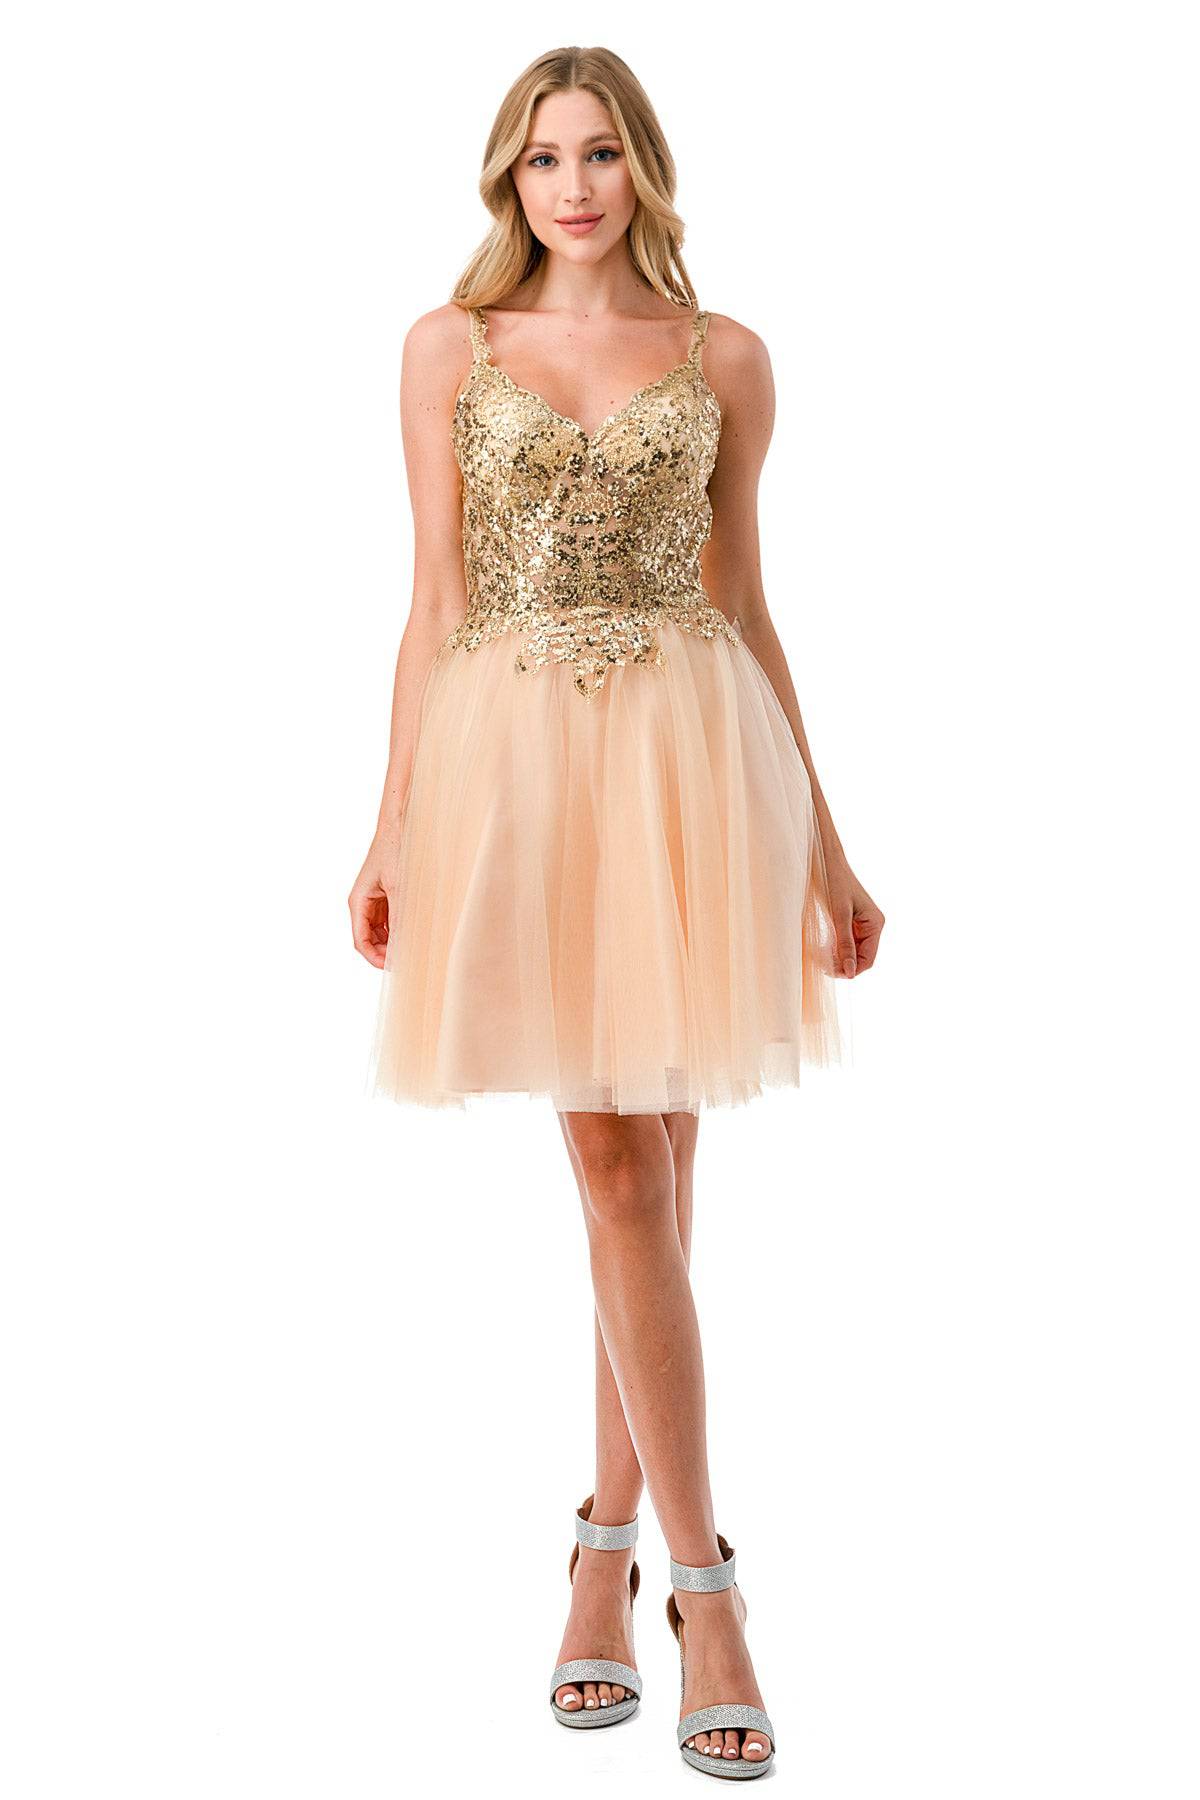 Aspeed S2757J Champagne & Gold Short Dress - NORMA REED